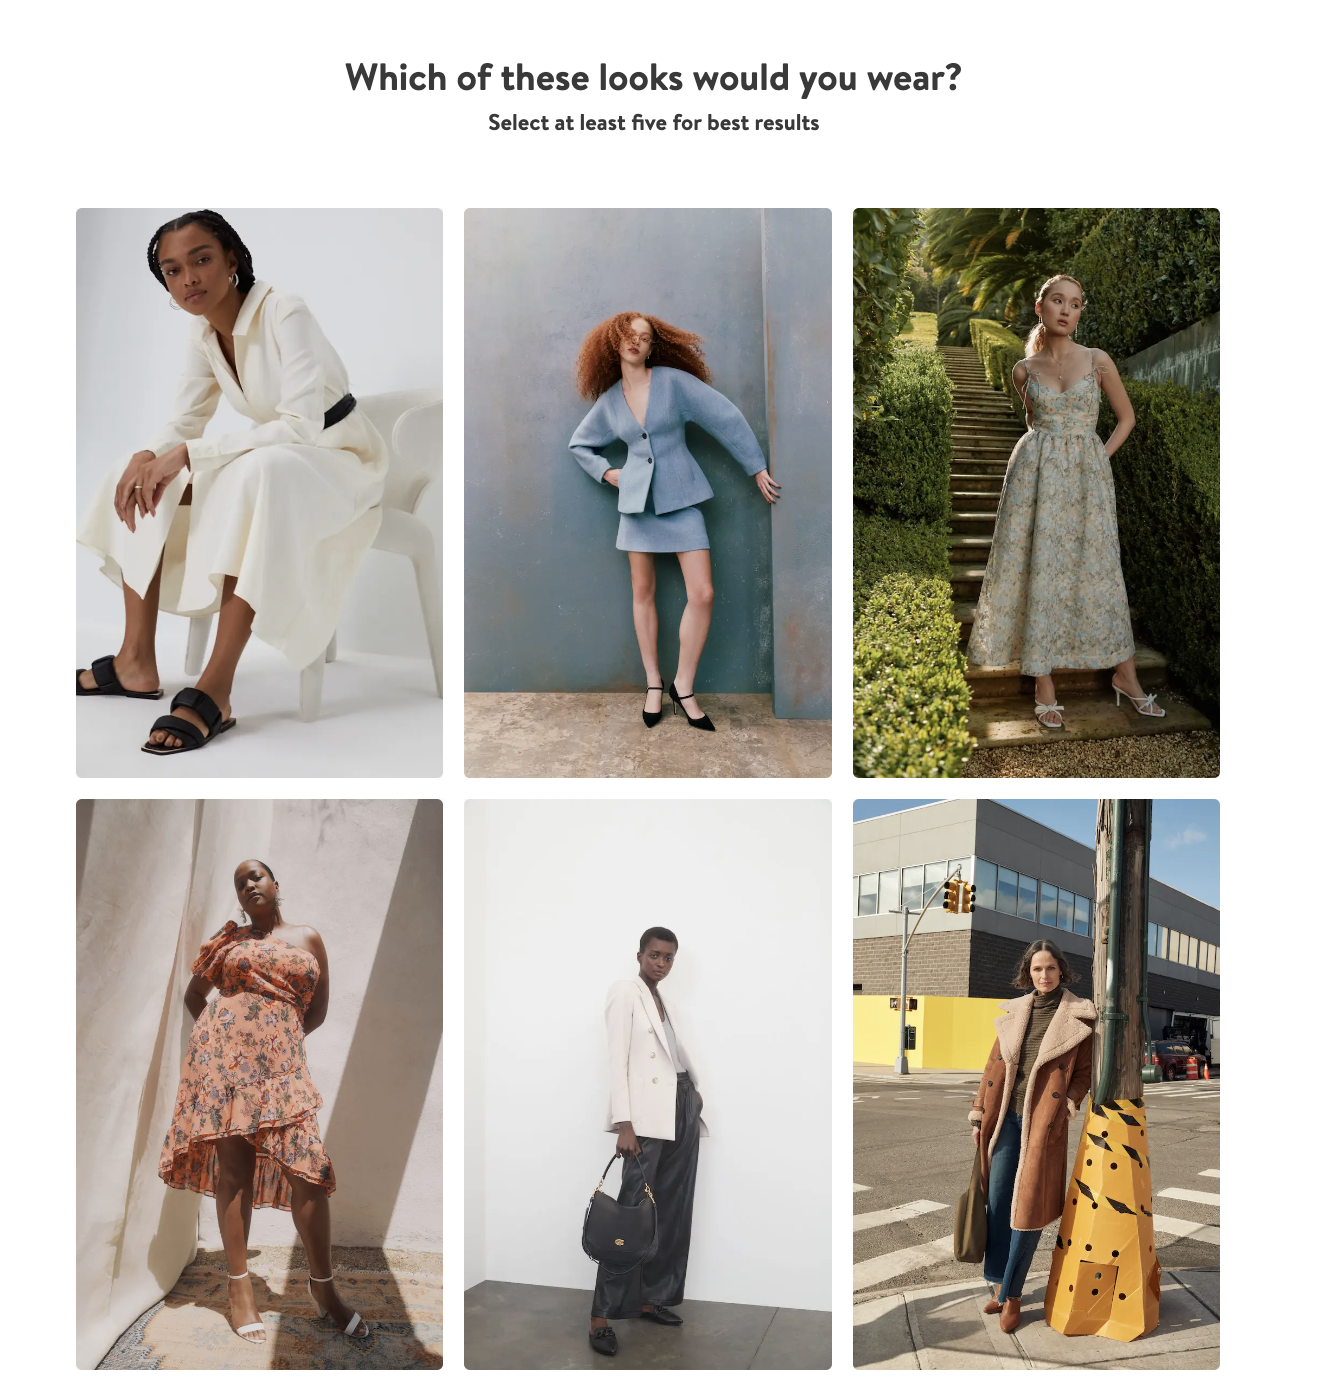 Nordstrom's style finder quiz asks visitors, which of these looks would you wear?